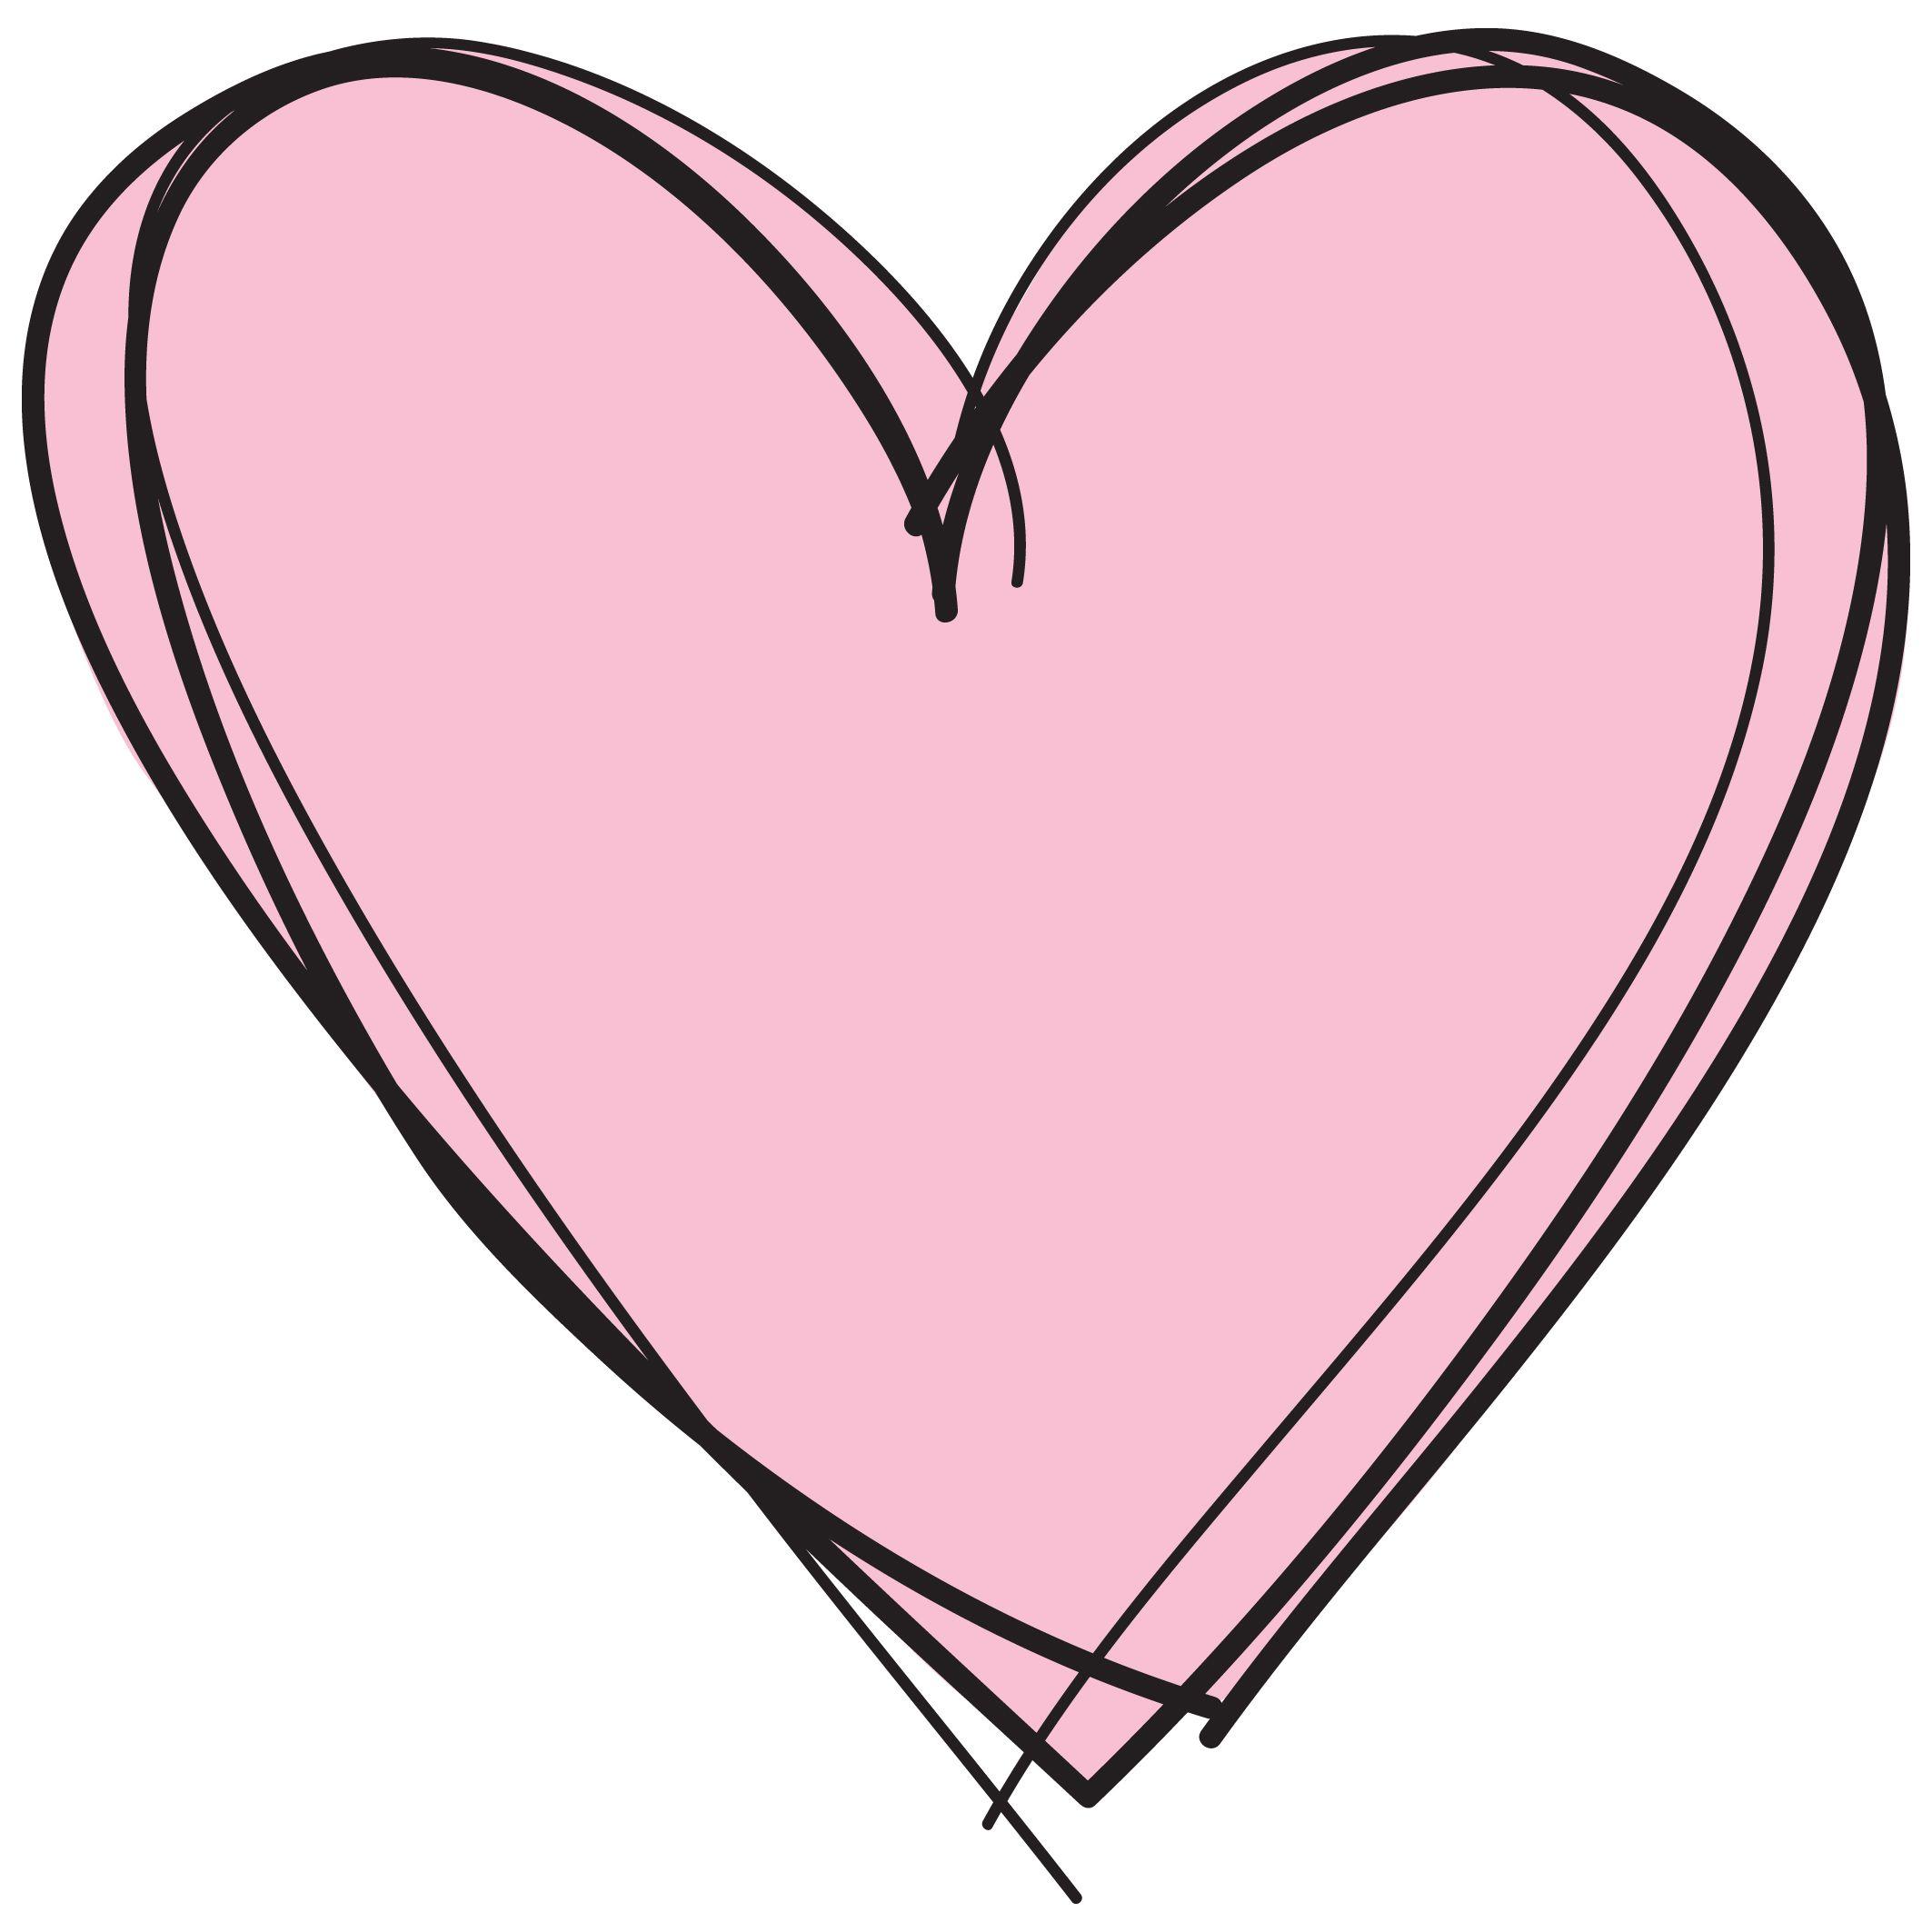 Pink Heart Logo - Free Pink Heart Image, Download Free Clip Art, Free Clip Art on ...